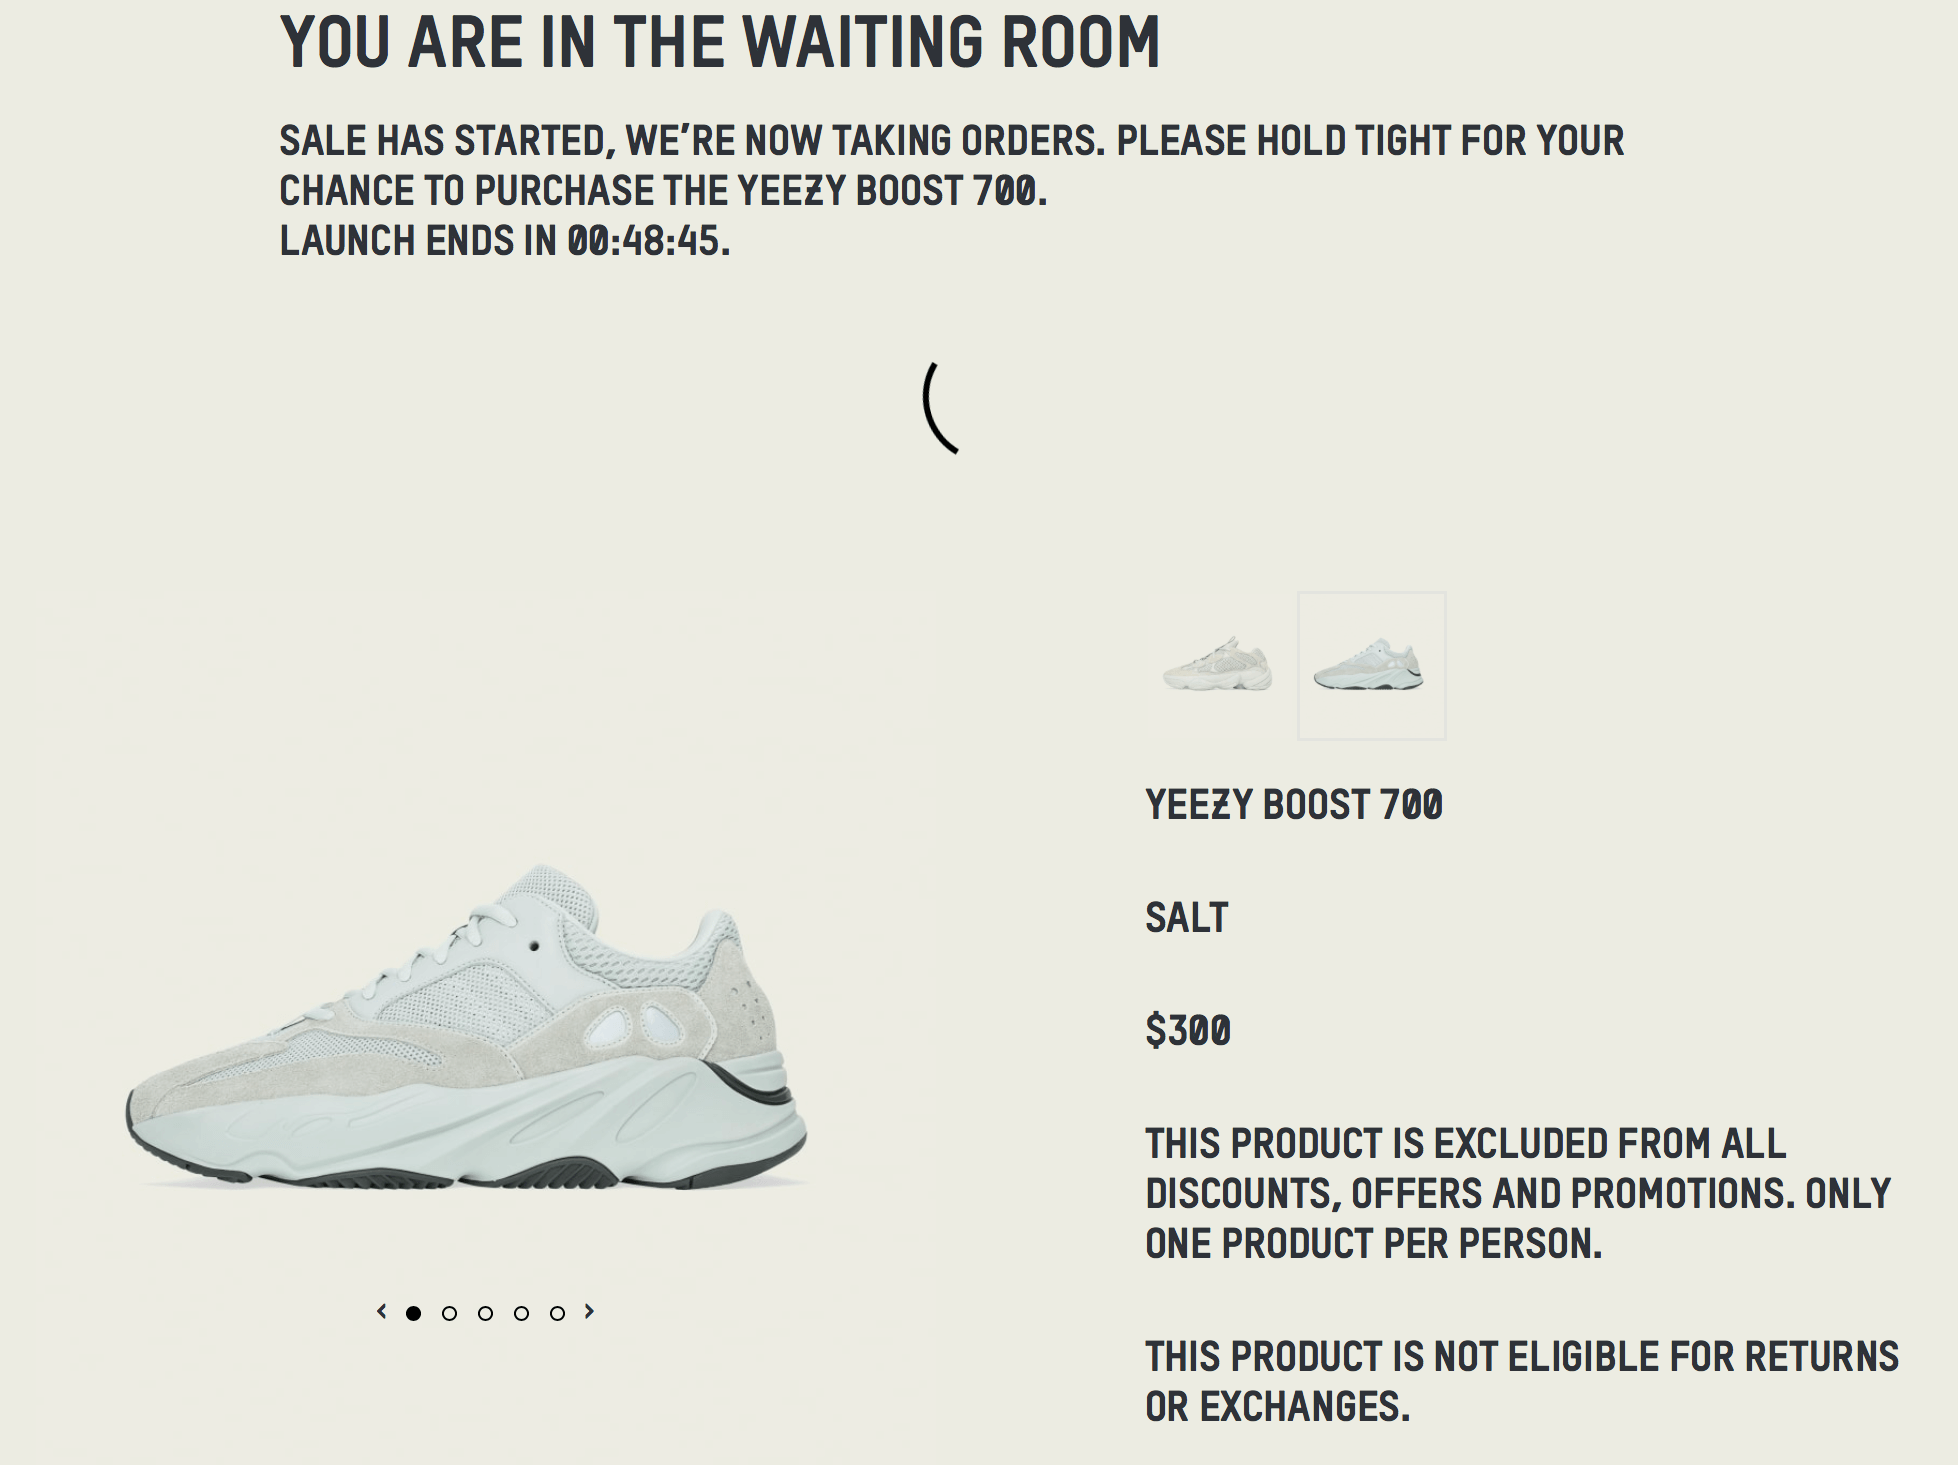 yeezy supply line wait time